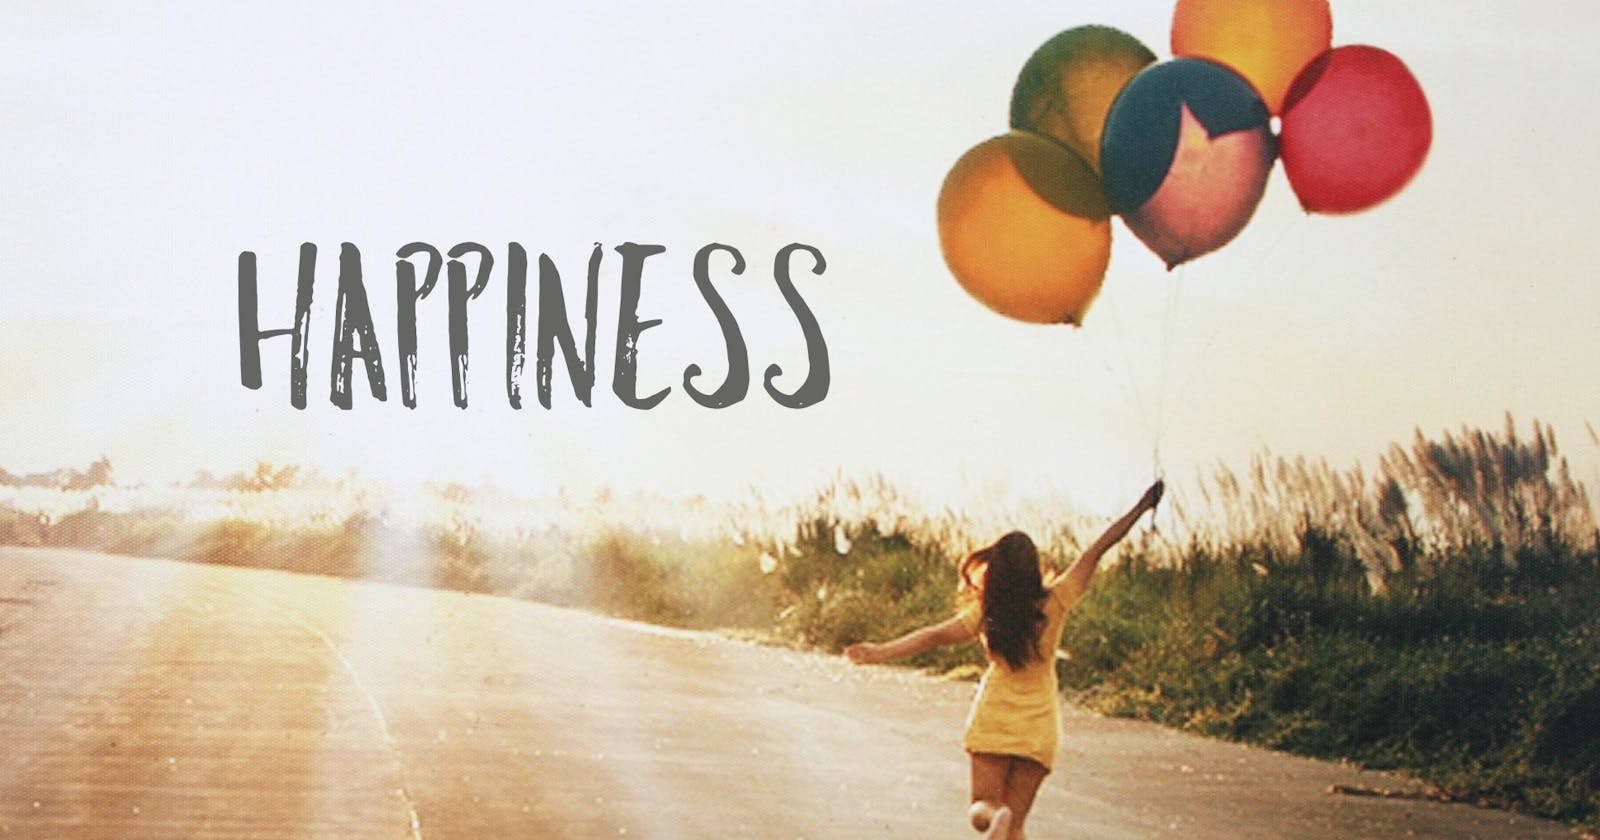 Happiness and well being